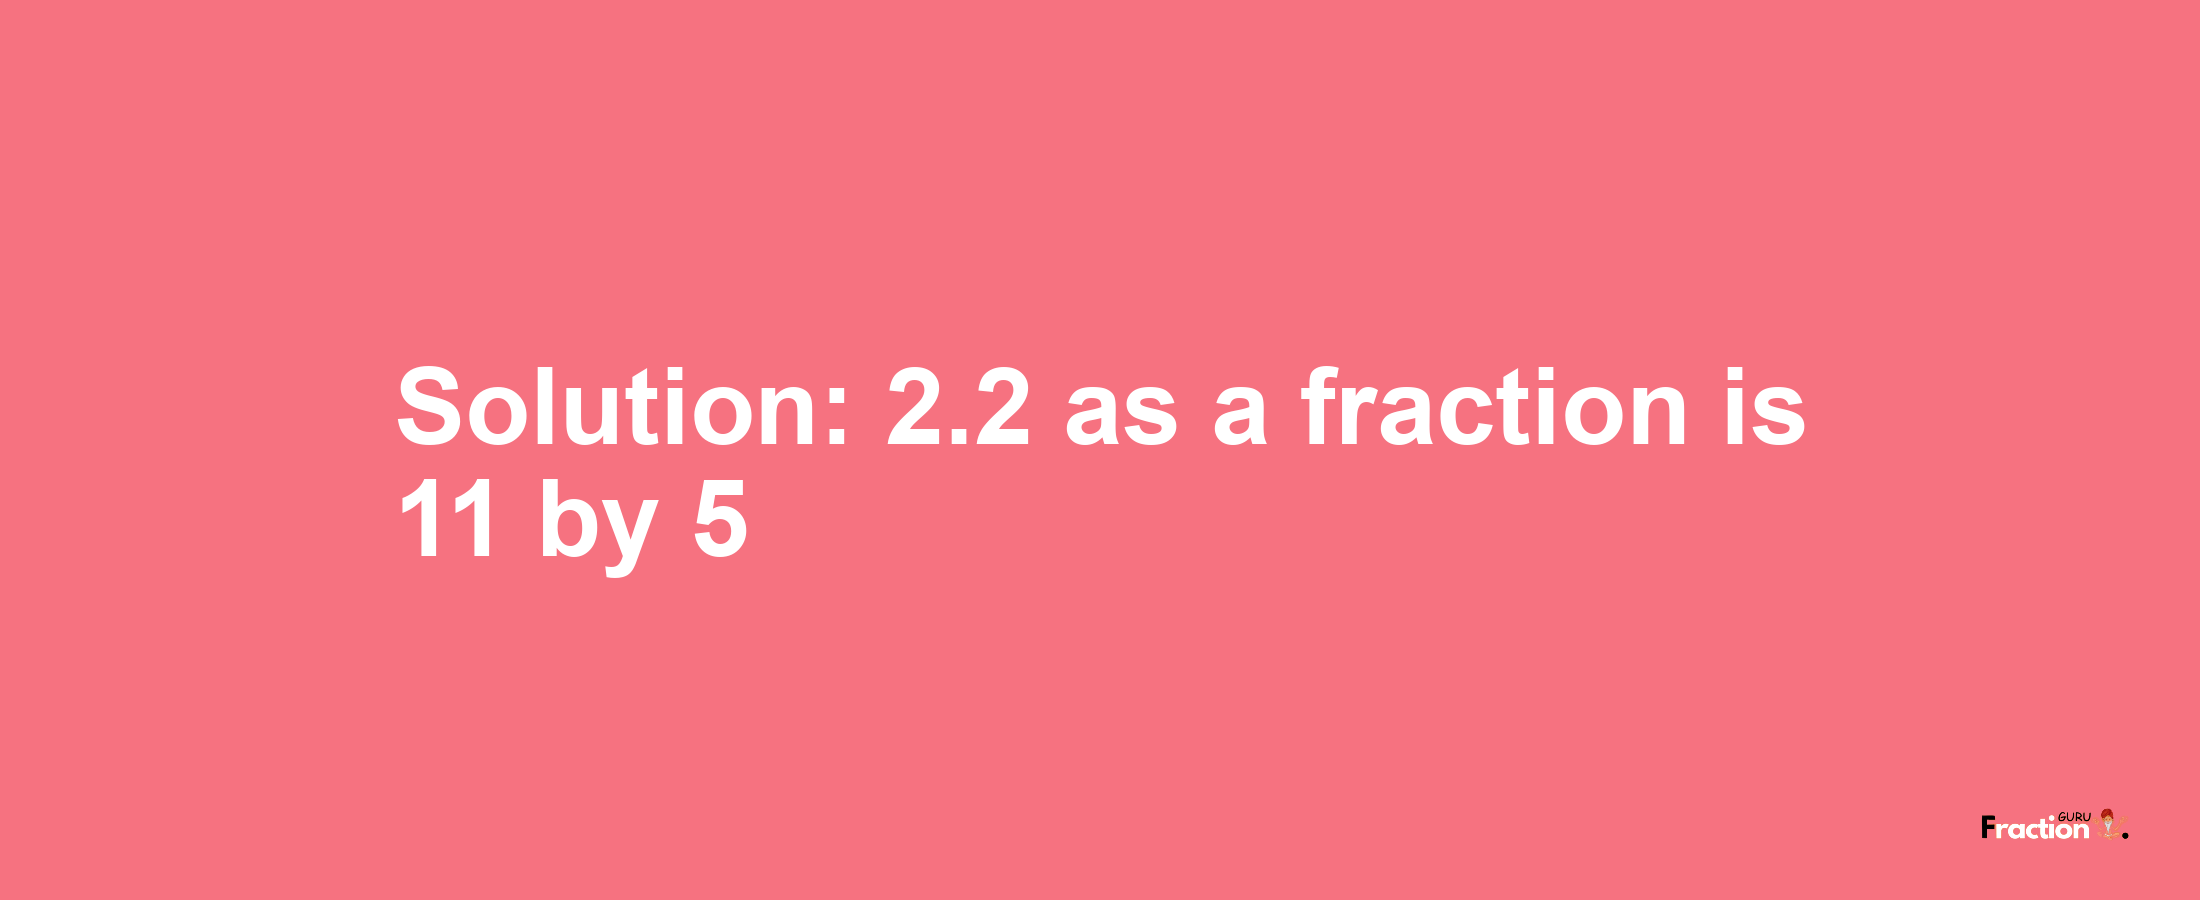 Solution:2.2 as a fraction is 11/5